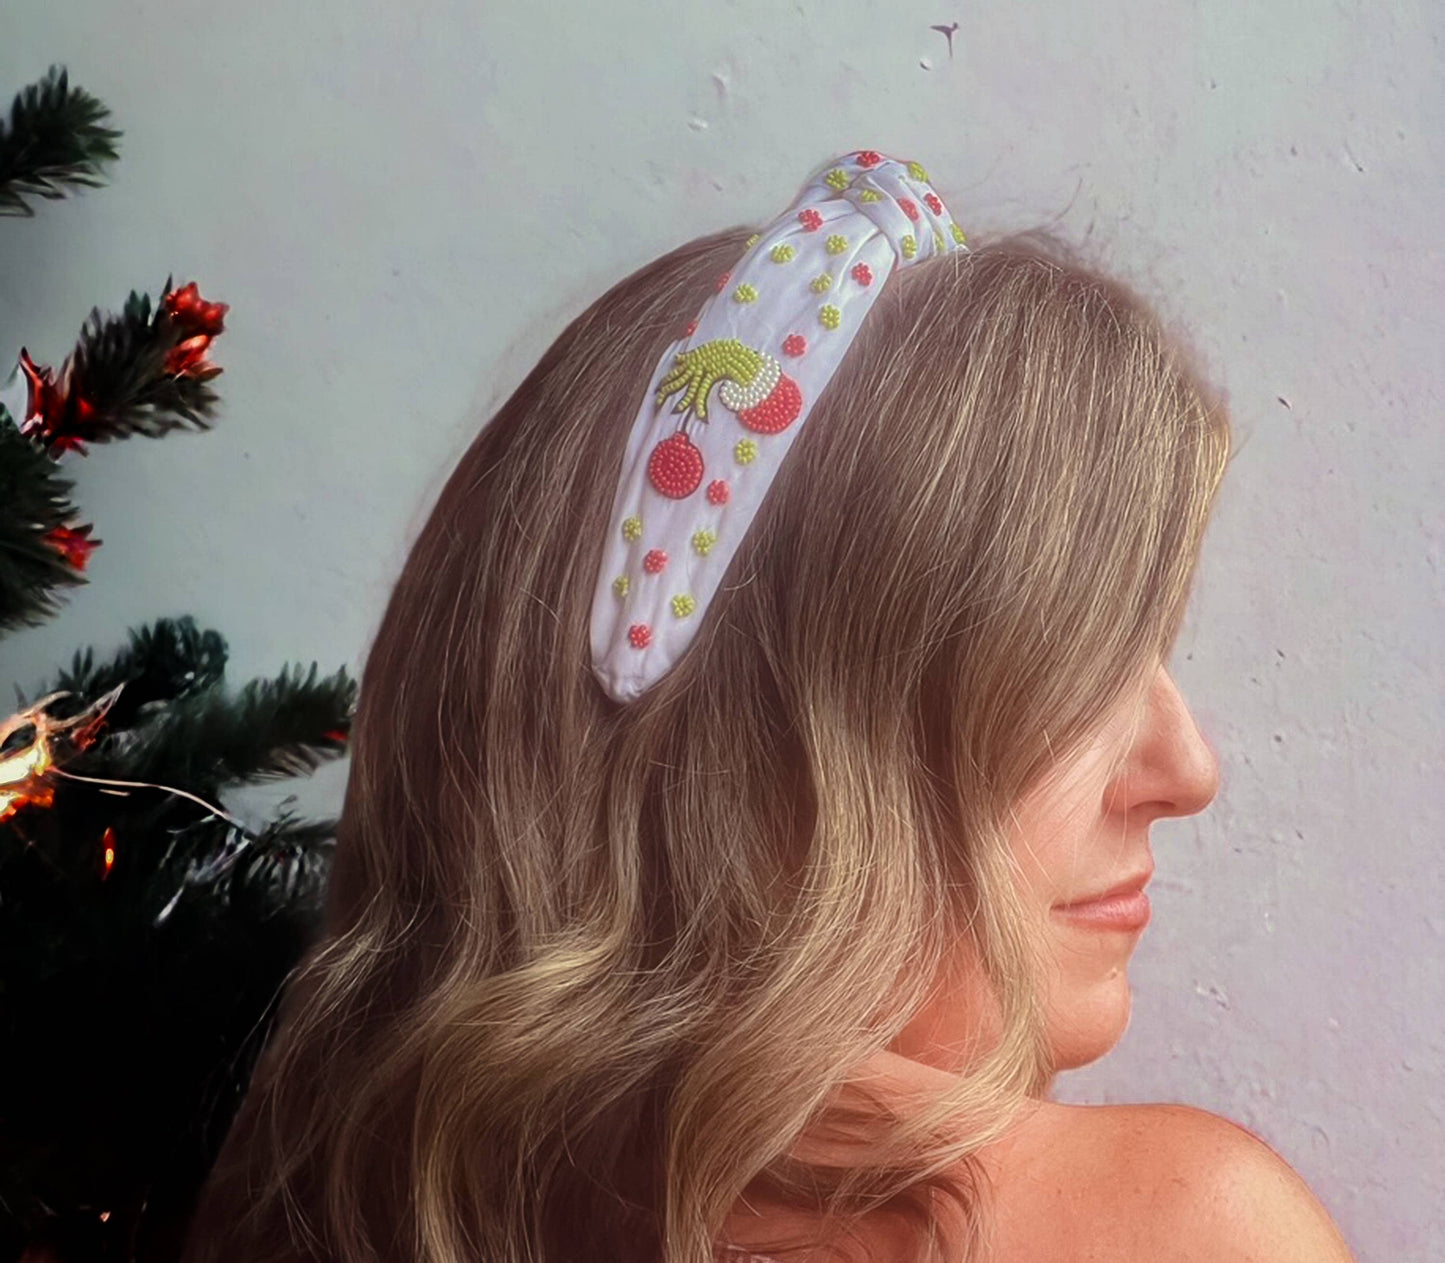 A Festive Beaded Christmas Headband by Bash adds a festive touch to a woman posing in front of a Christmas tree.